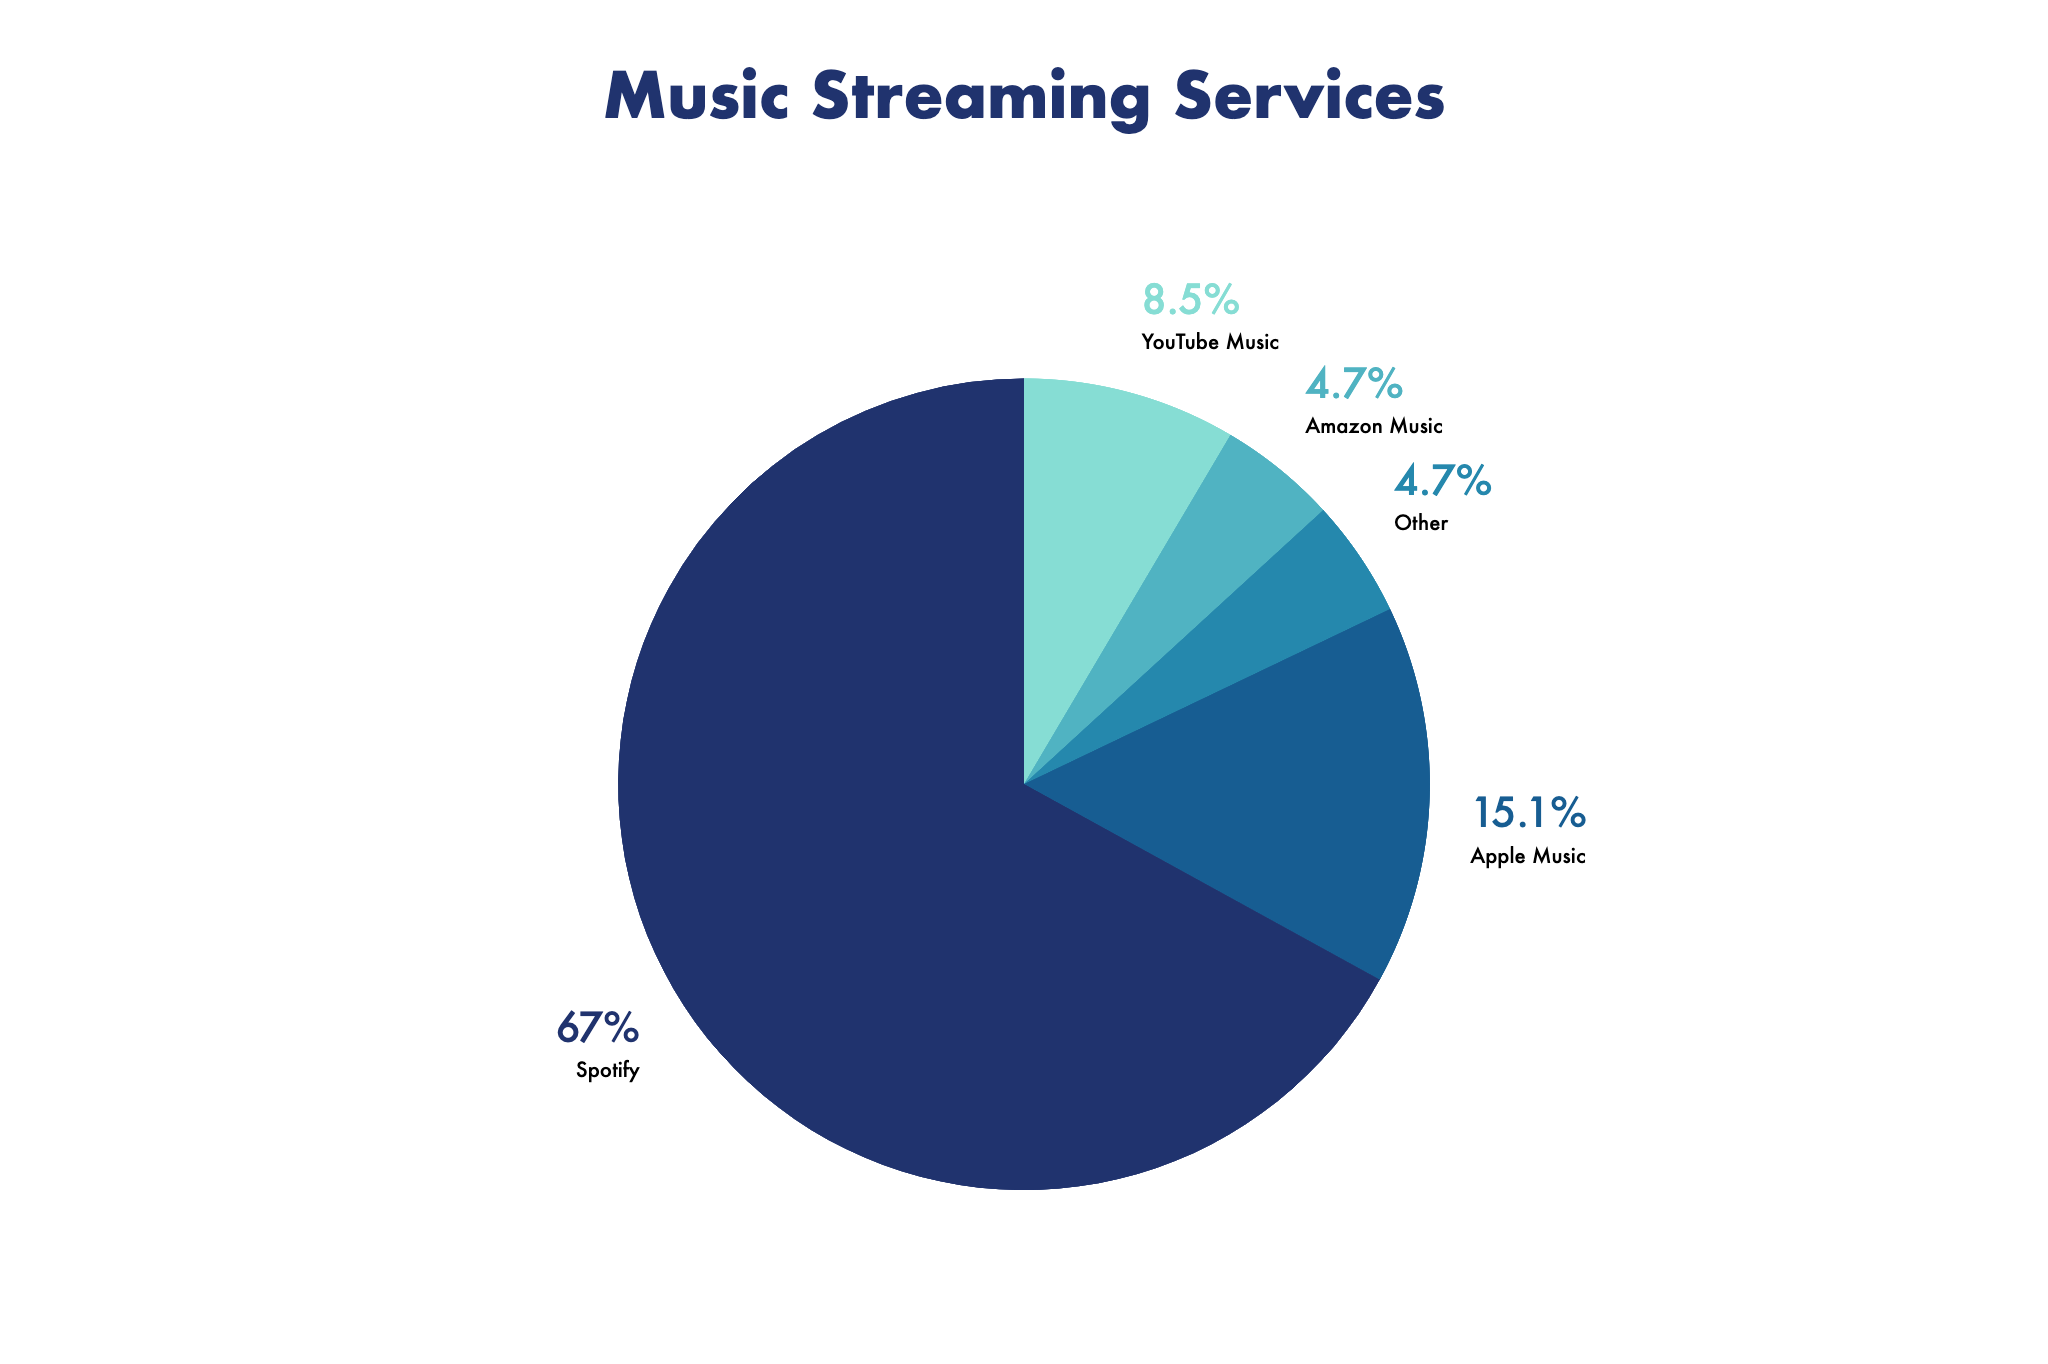 Music streaming services features, free versions compared